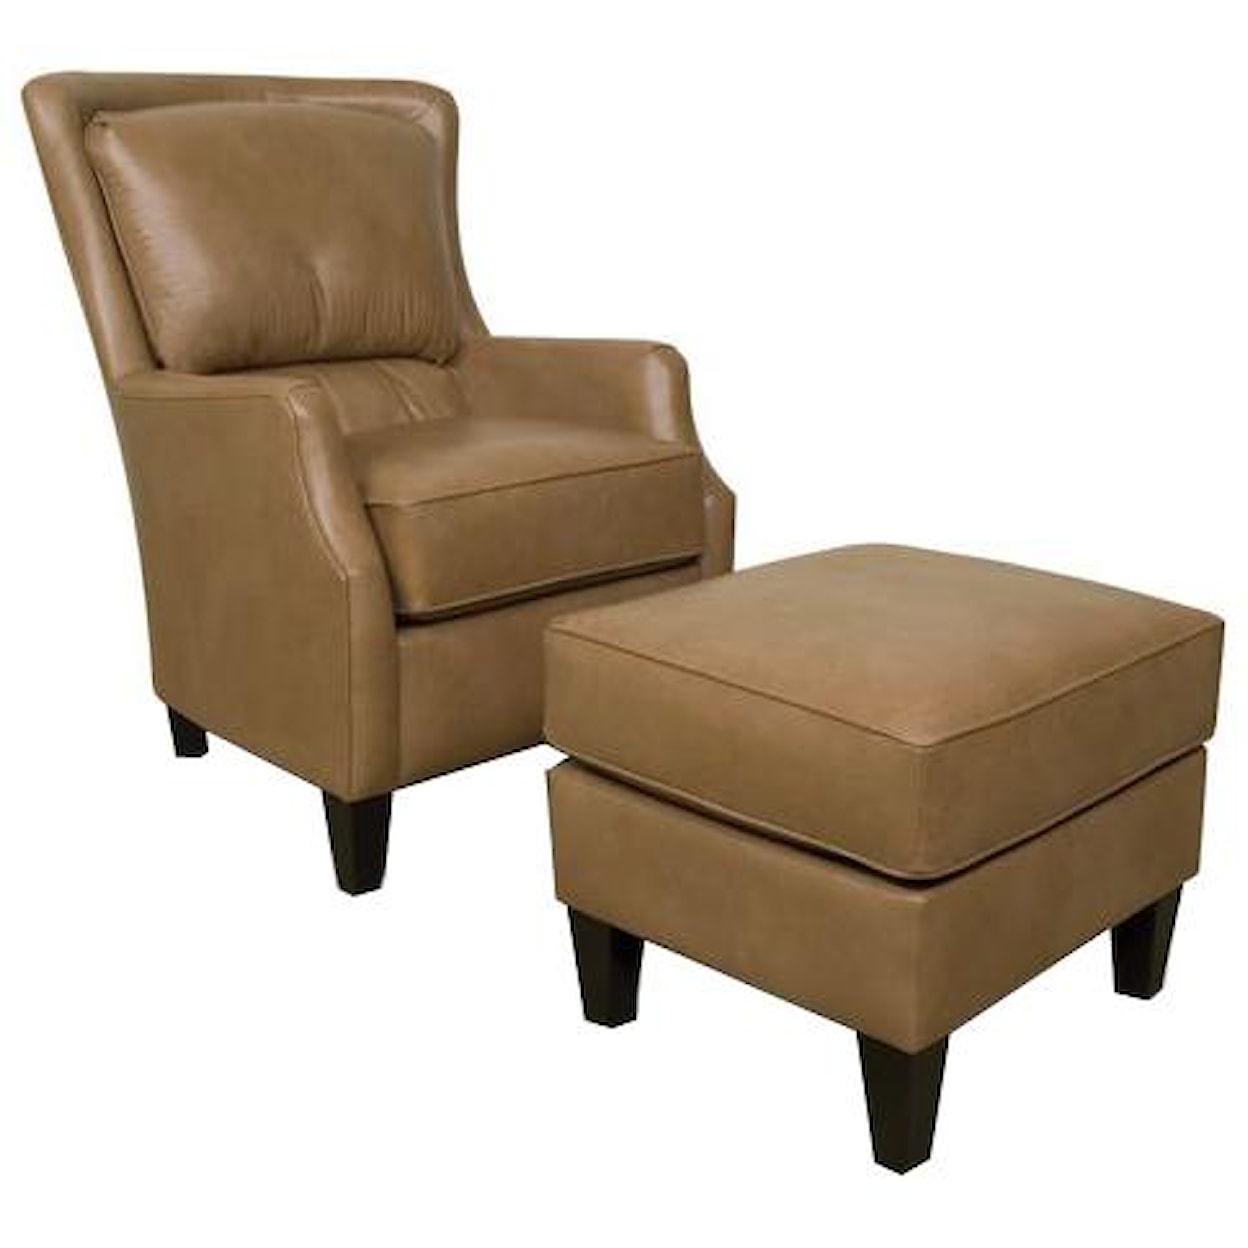 England LISETTE Upholstered Club Chair and Ottoman